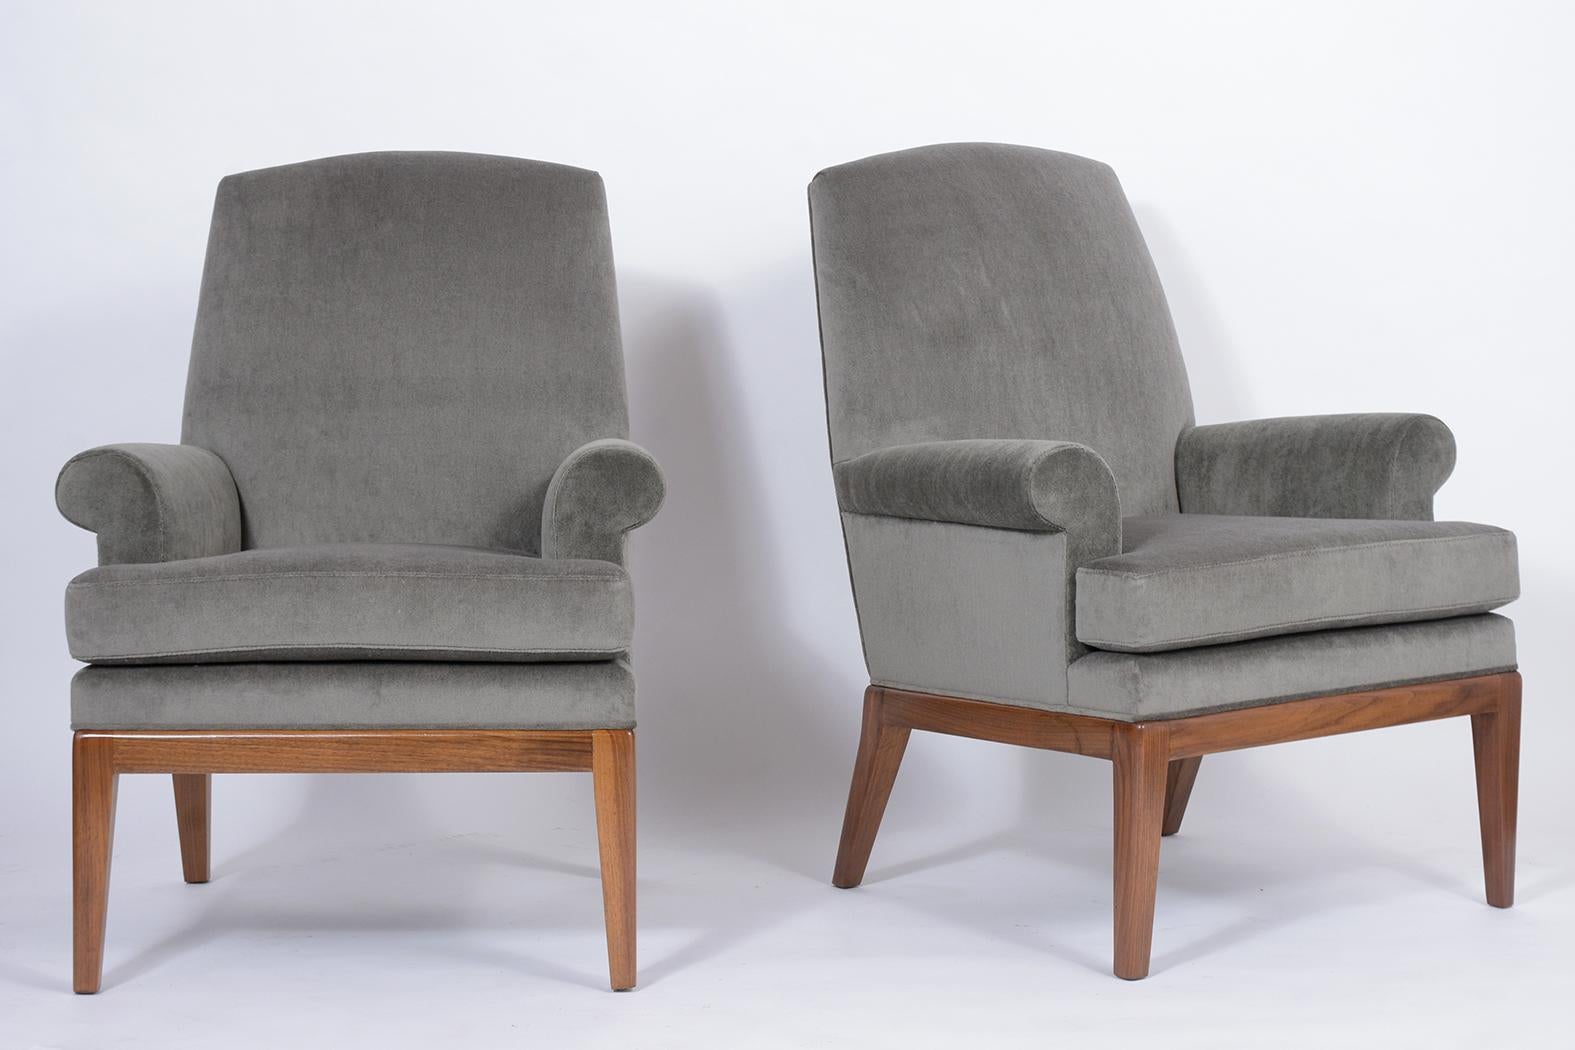 A 1960s pair of Danish style modern lounge chairs handcrafted out of walnut wood with a newly stained in walnut color with a lacquered finish and are professionally restored. These armchairs feature sculpted slatted backrests, rounded armrests, and